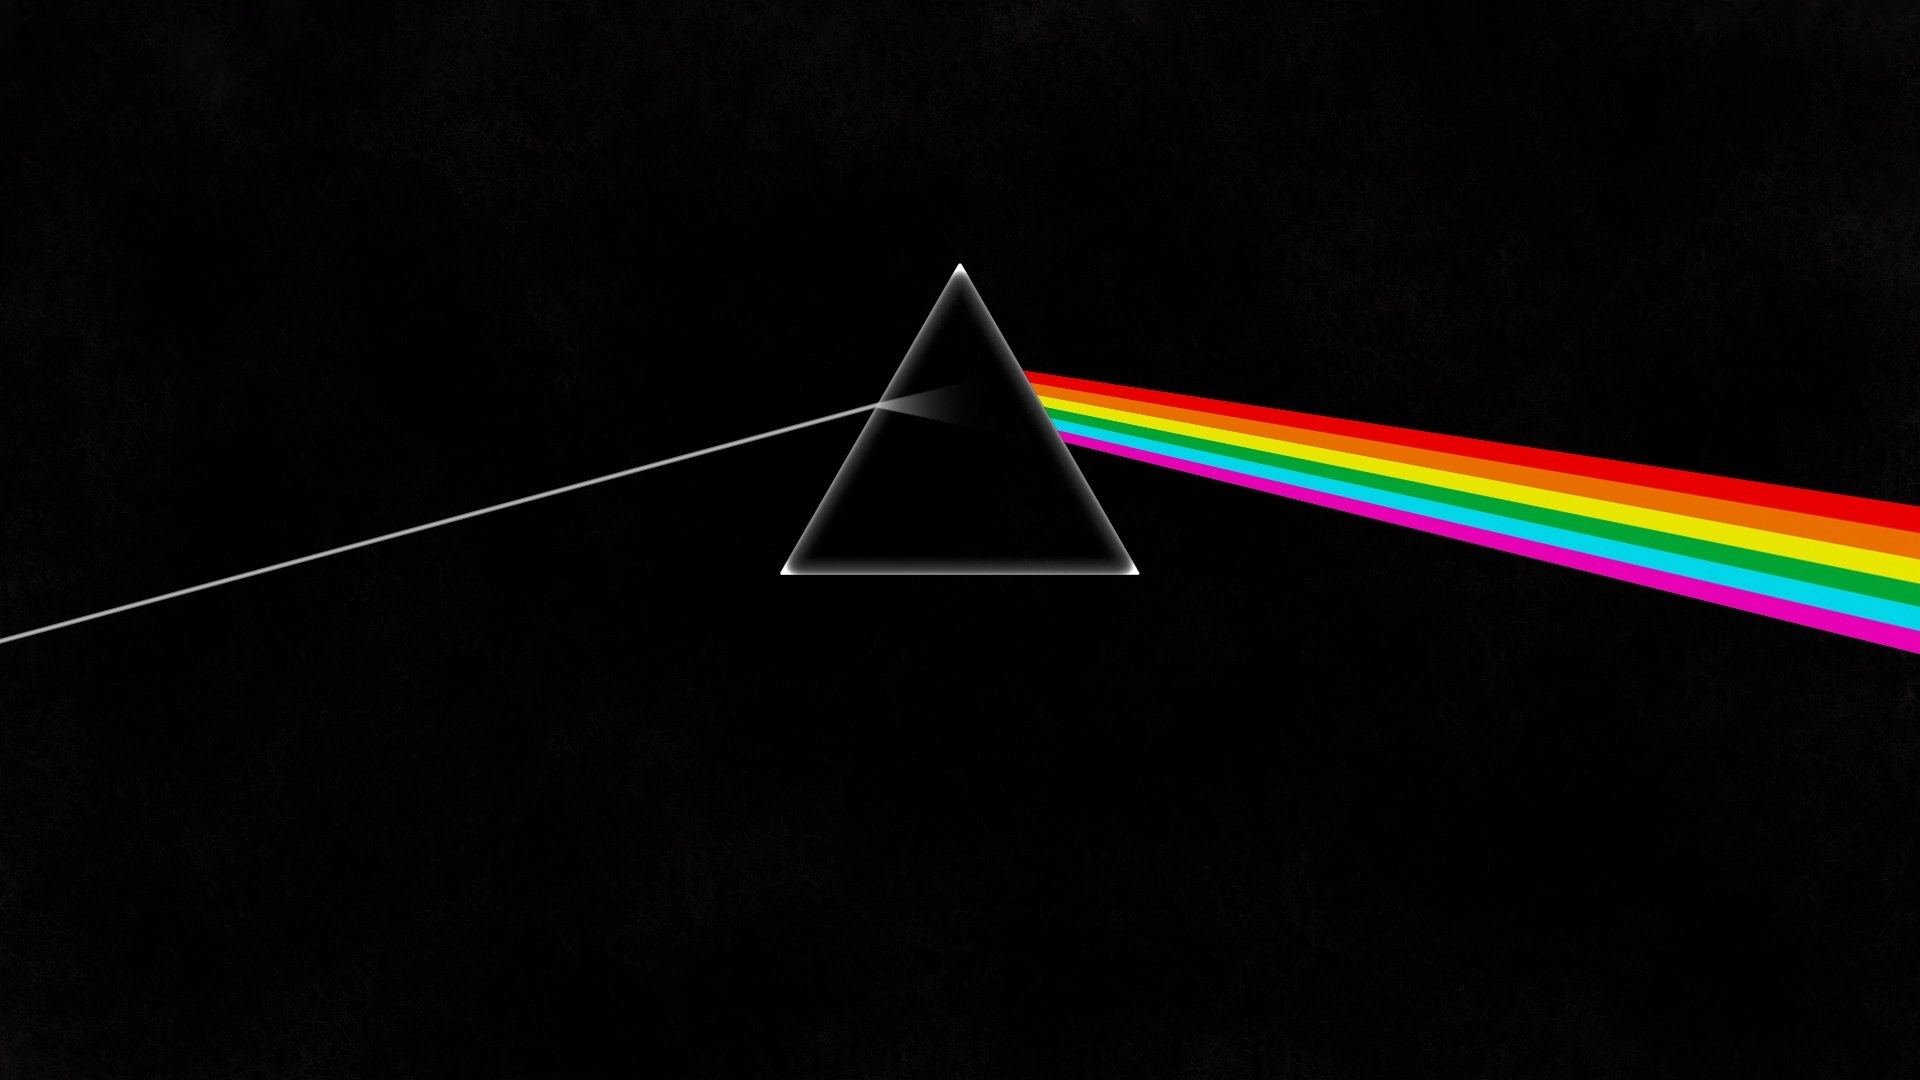 10 New Pink Floyd Hd Wallpaper FULL HD 1920×1080 For PC Background